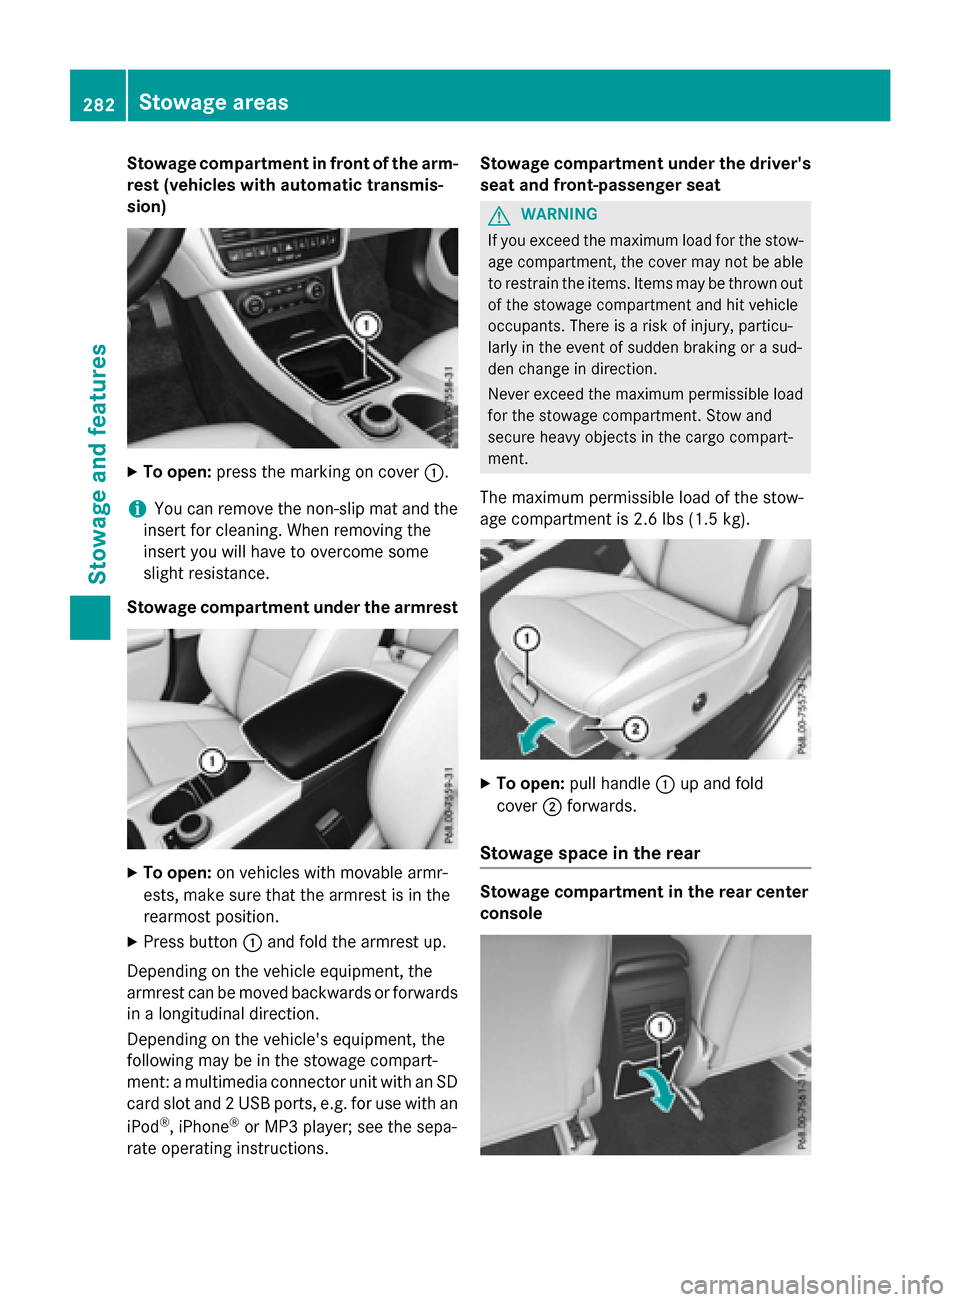 MERCEDES-BENZ GLA-Class 2017 X156 Owners Manual Stowage compartment in front of the arm-
rest (vehicles with automatic transmis-
sion)
XTo open:press the marking on cover :.
iYou can remove the non-slip mat and the
insert for cleaning. When removin